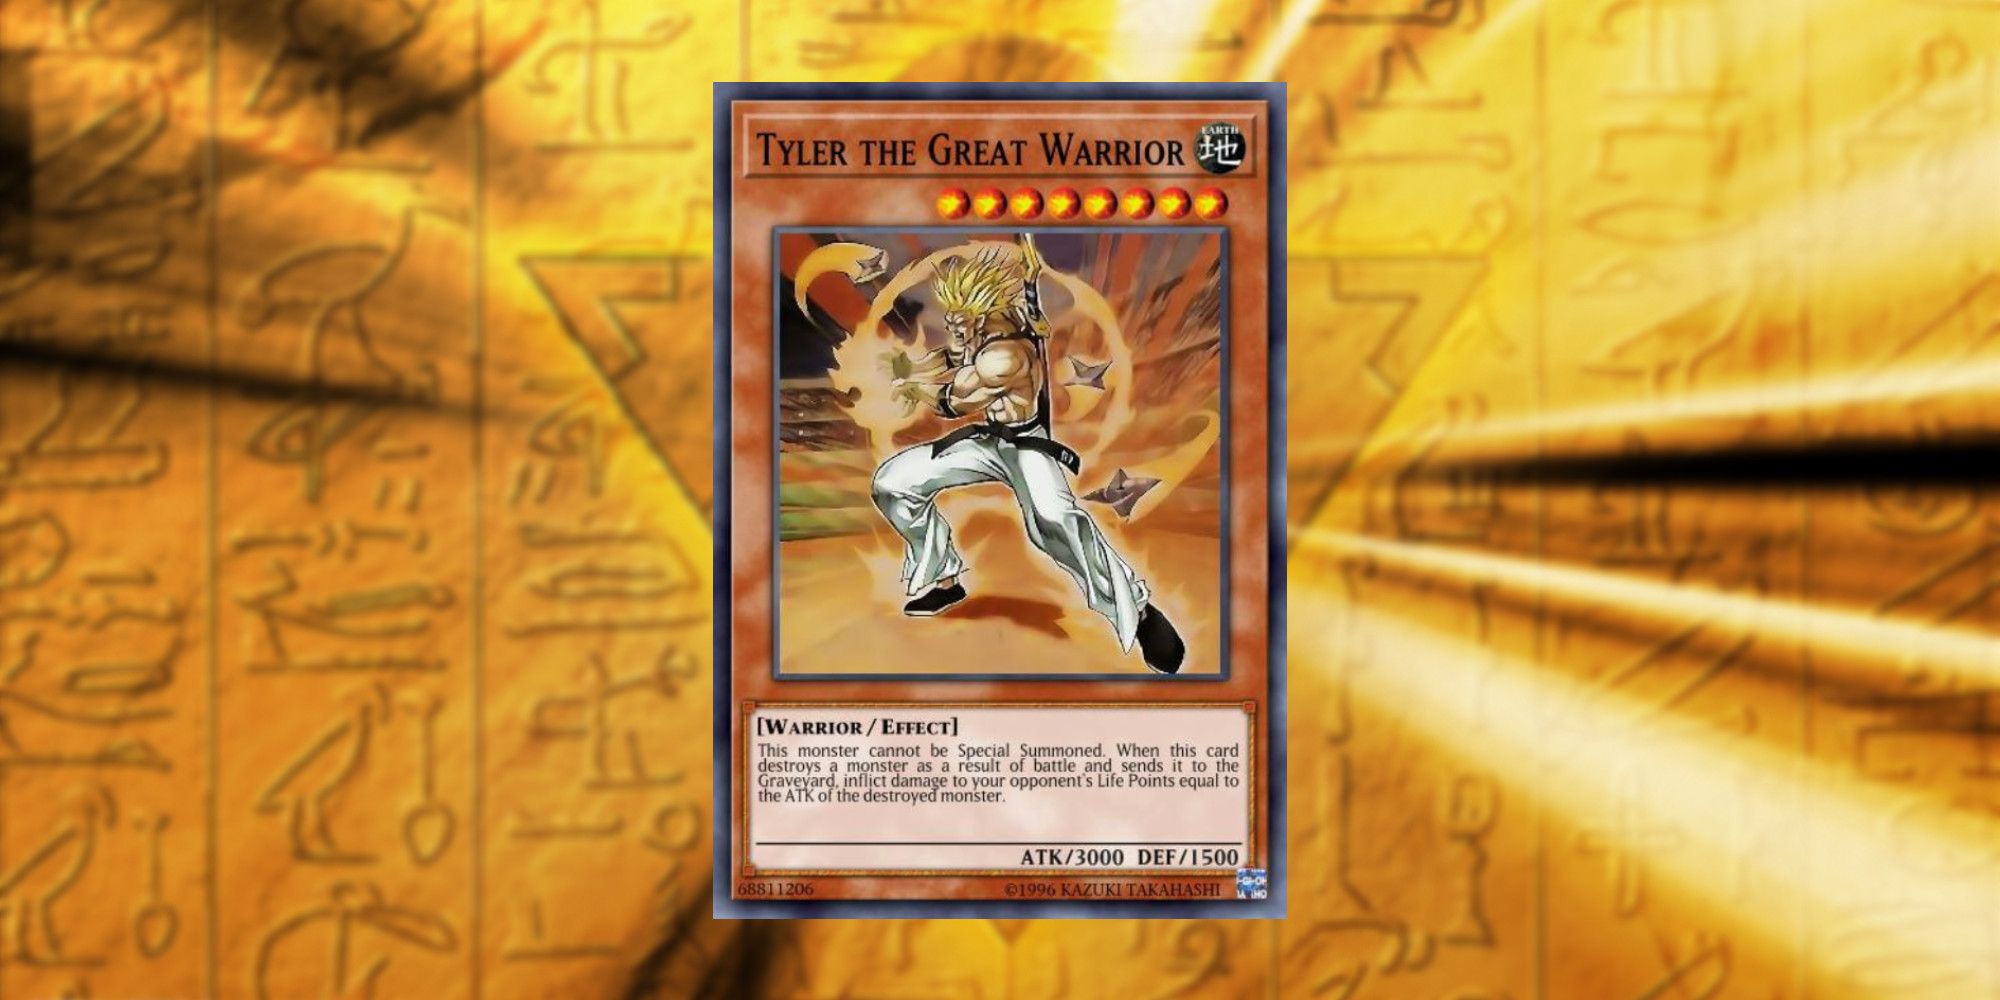 Yu-Gi-Oh!’s Rarest Card Is Being Sold For The First Time After 18 Years